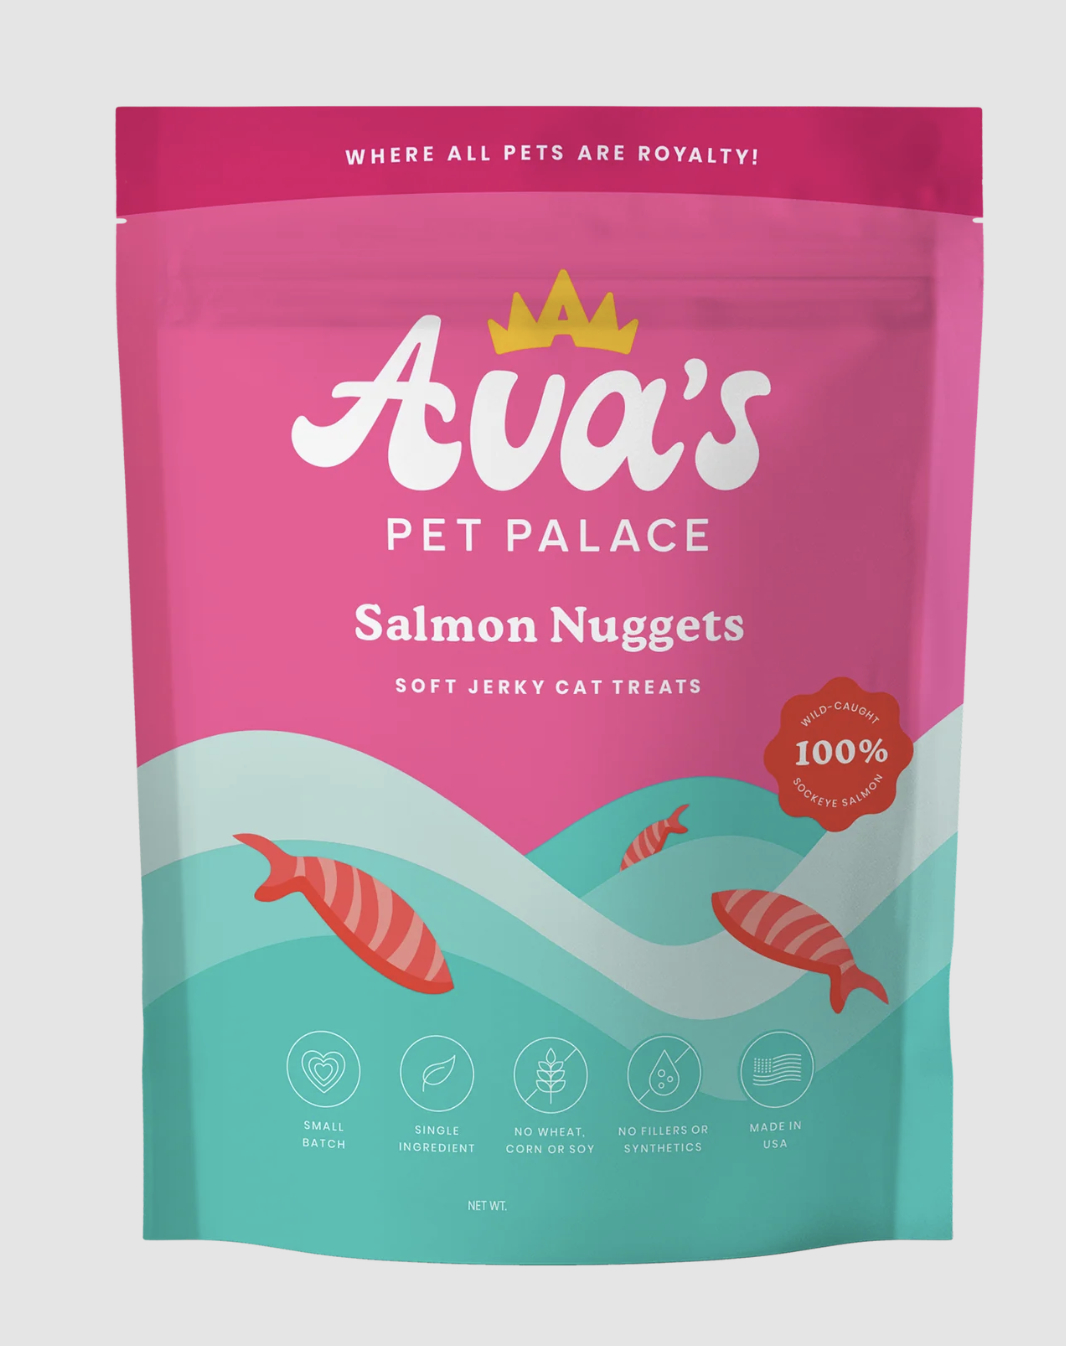 Package of Ava&#x27;s Pet Palace Salmon Nuggets, soft jerky cat treats with ingredient icons on a pink and teal design